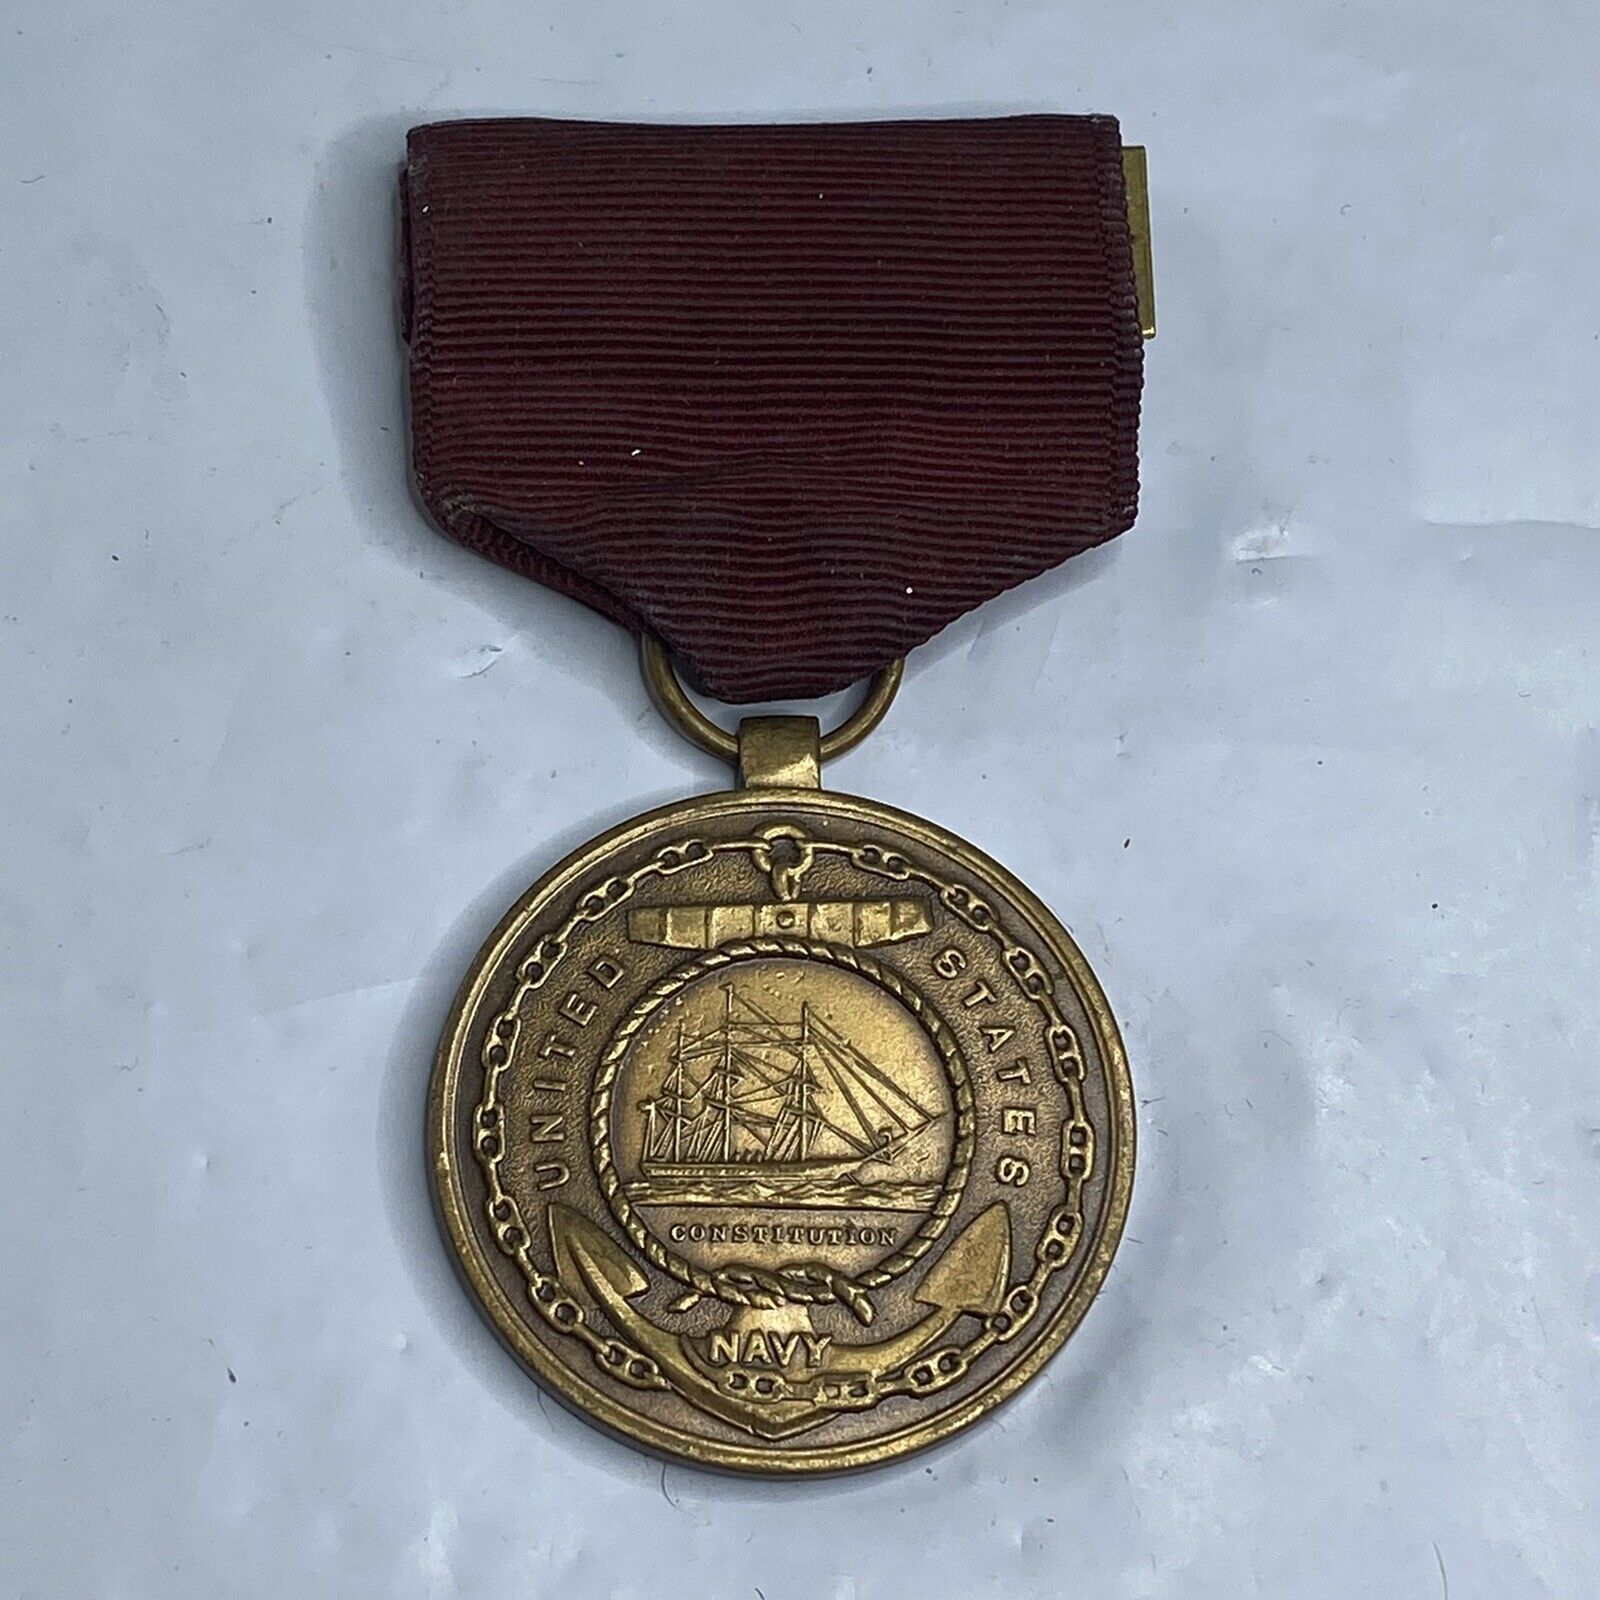 Vintage USN US Navy Good Conduct Medal US Constitution Ship Authentic Original